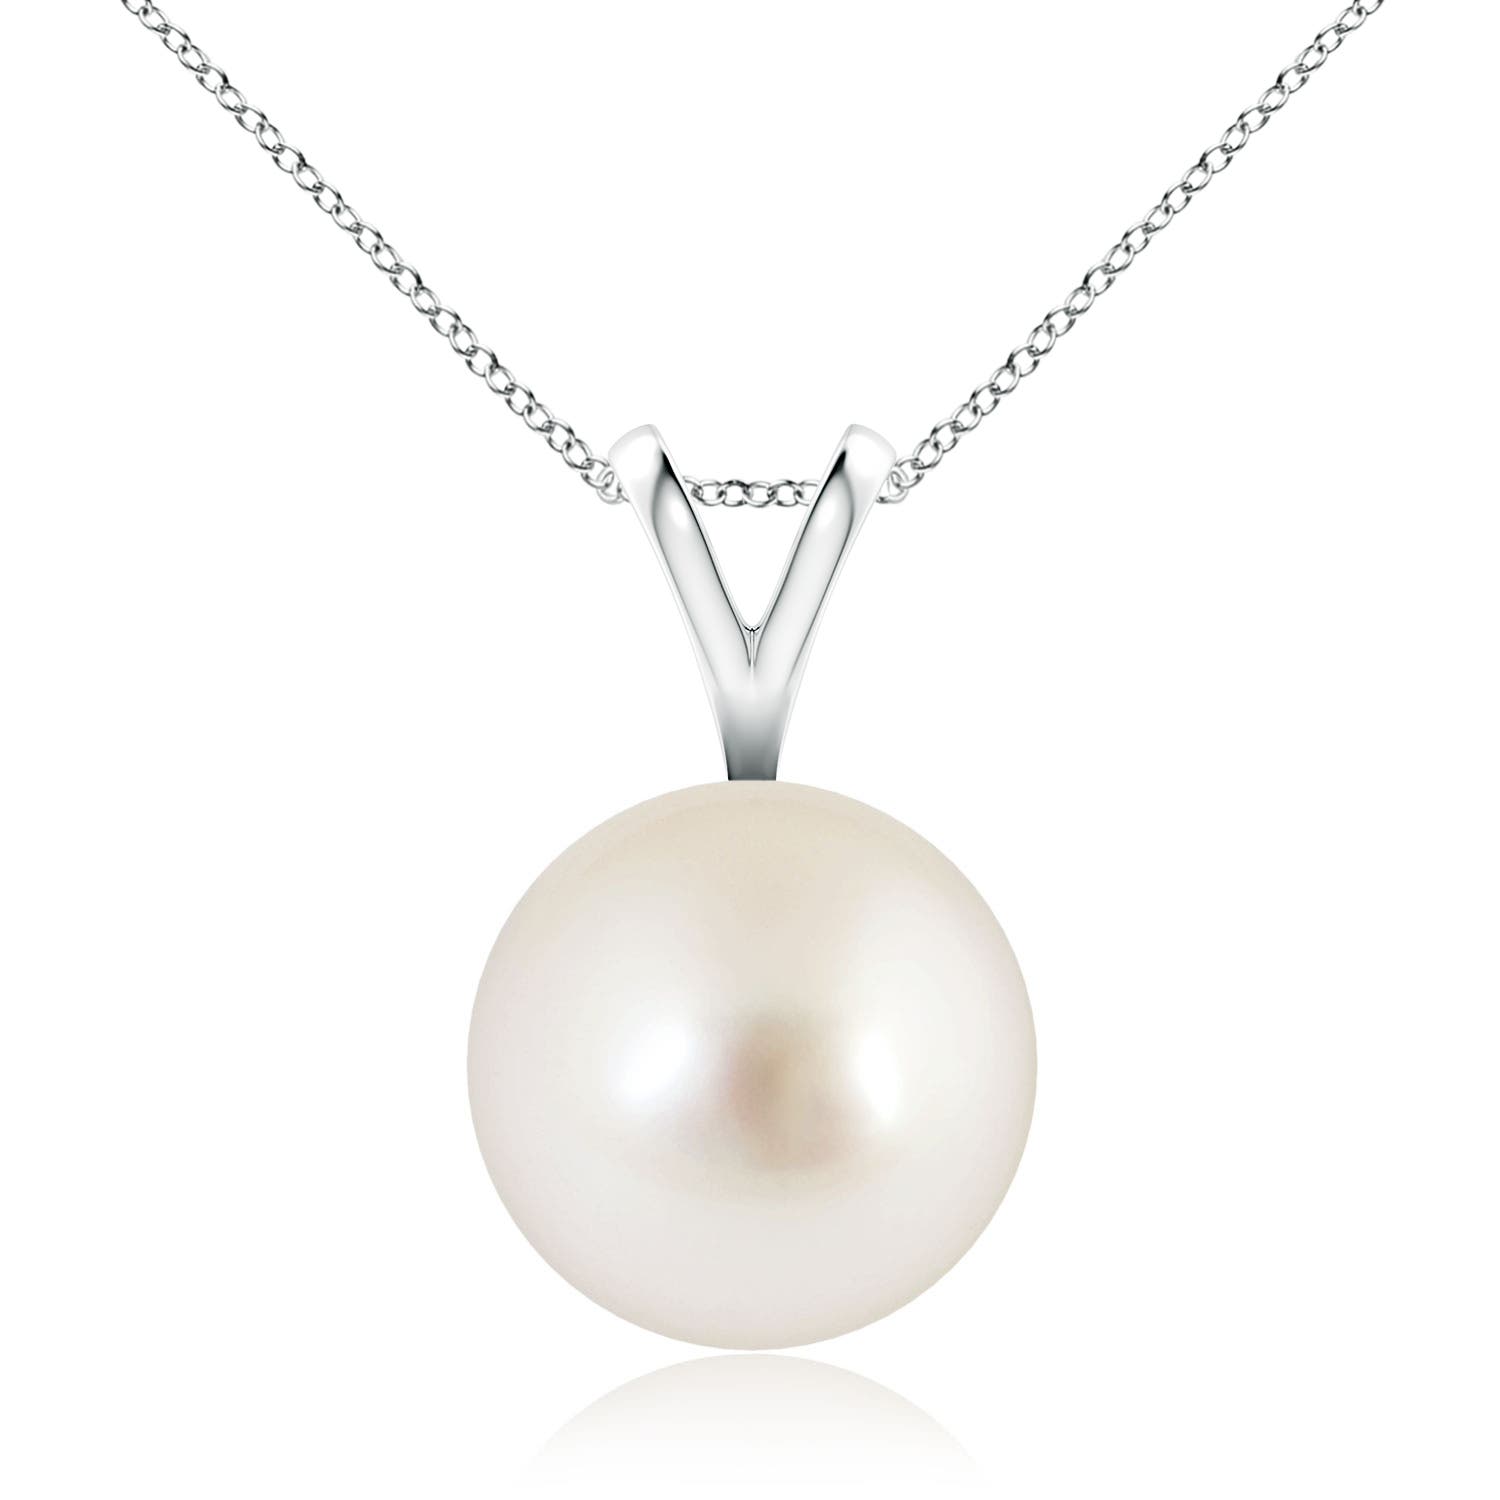 AAAA - South Sea Cultured Pearl / 7.2 CT / 14 KT White Gold